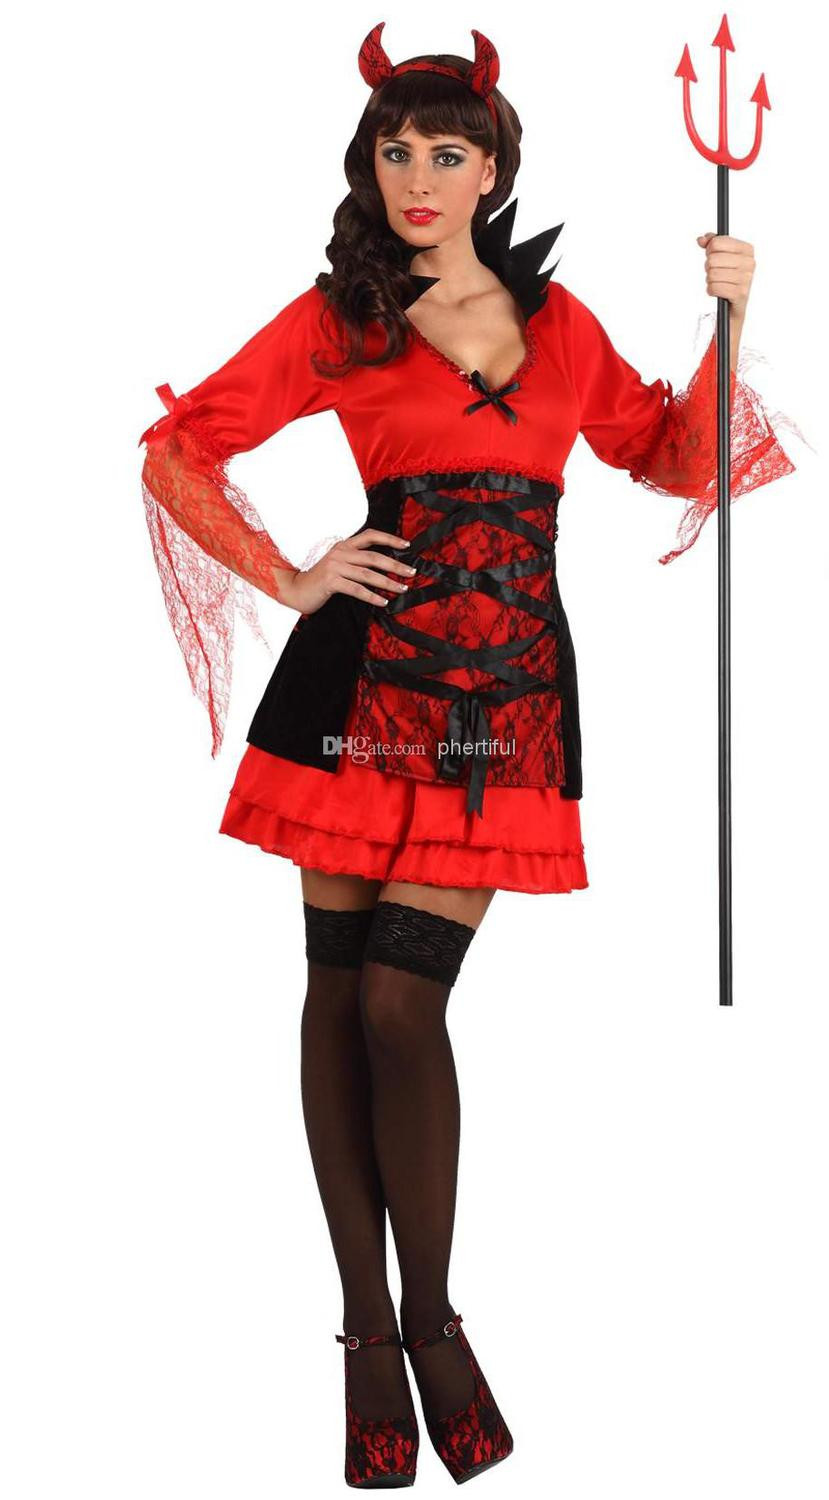 Wholesale Halloween Costume &amp; Party Supplies
 Aliexpress Buy Wholesale 2015 New Style Halloween